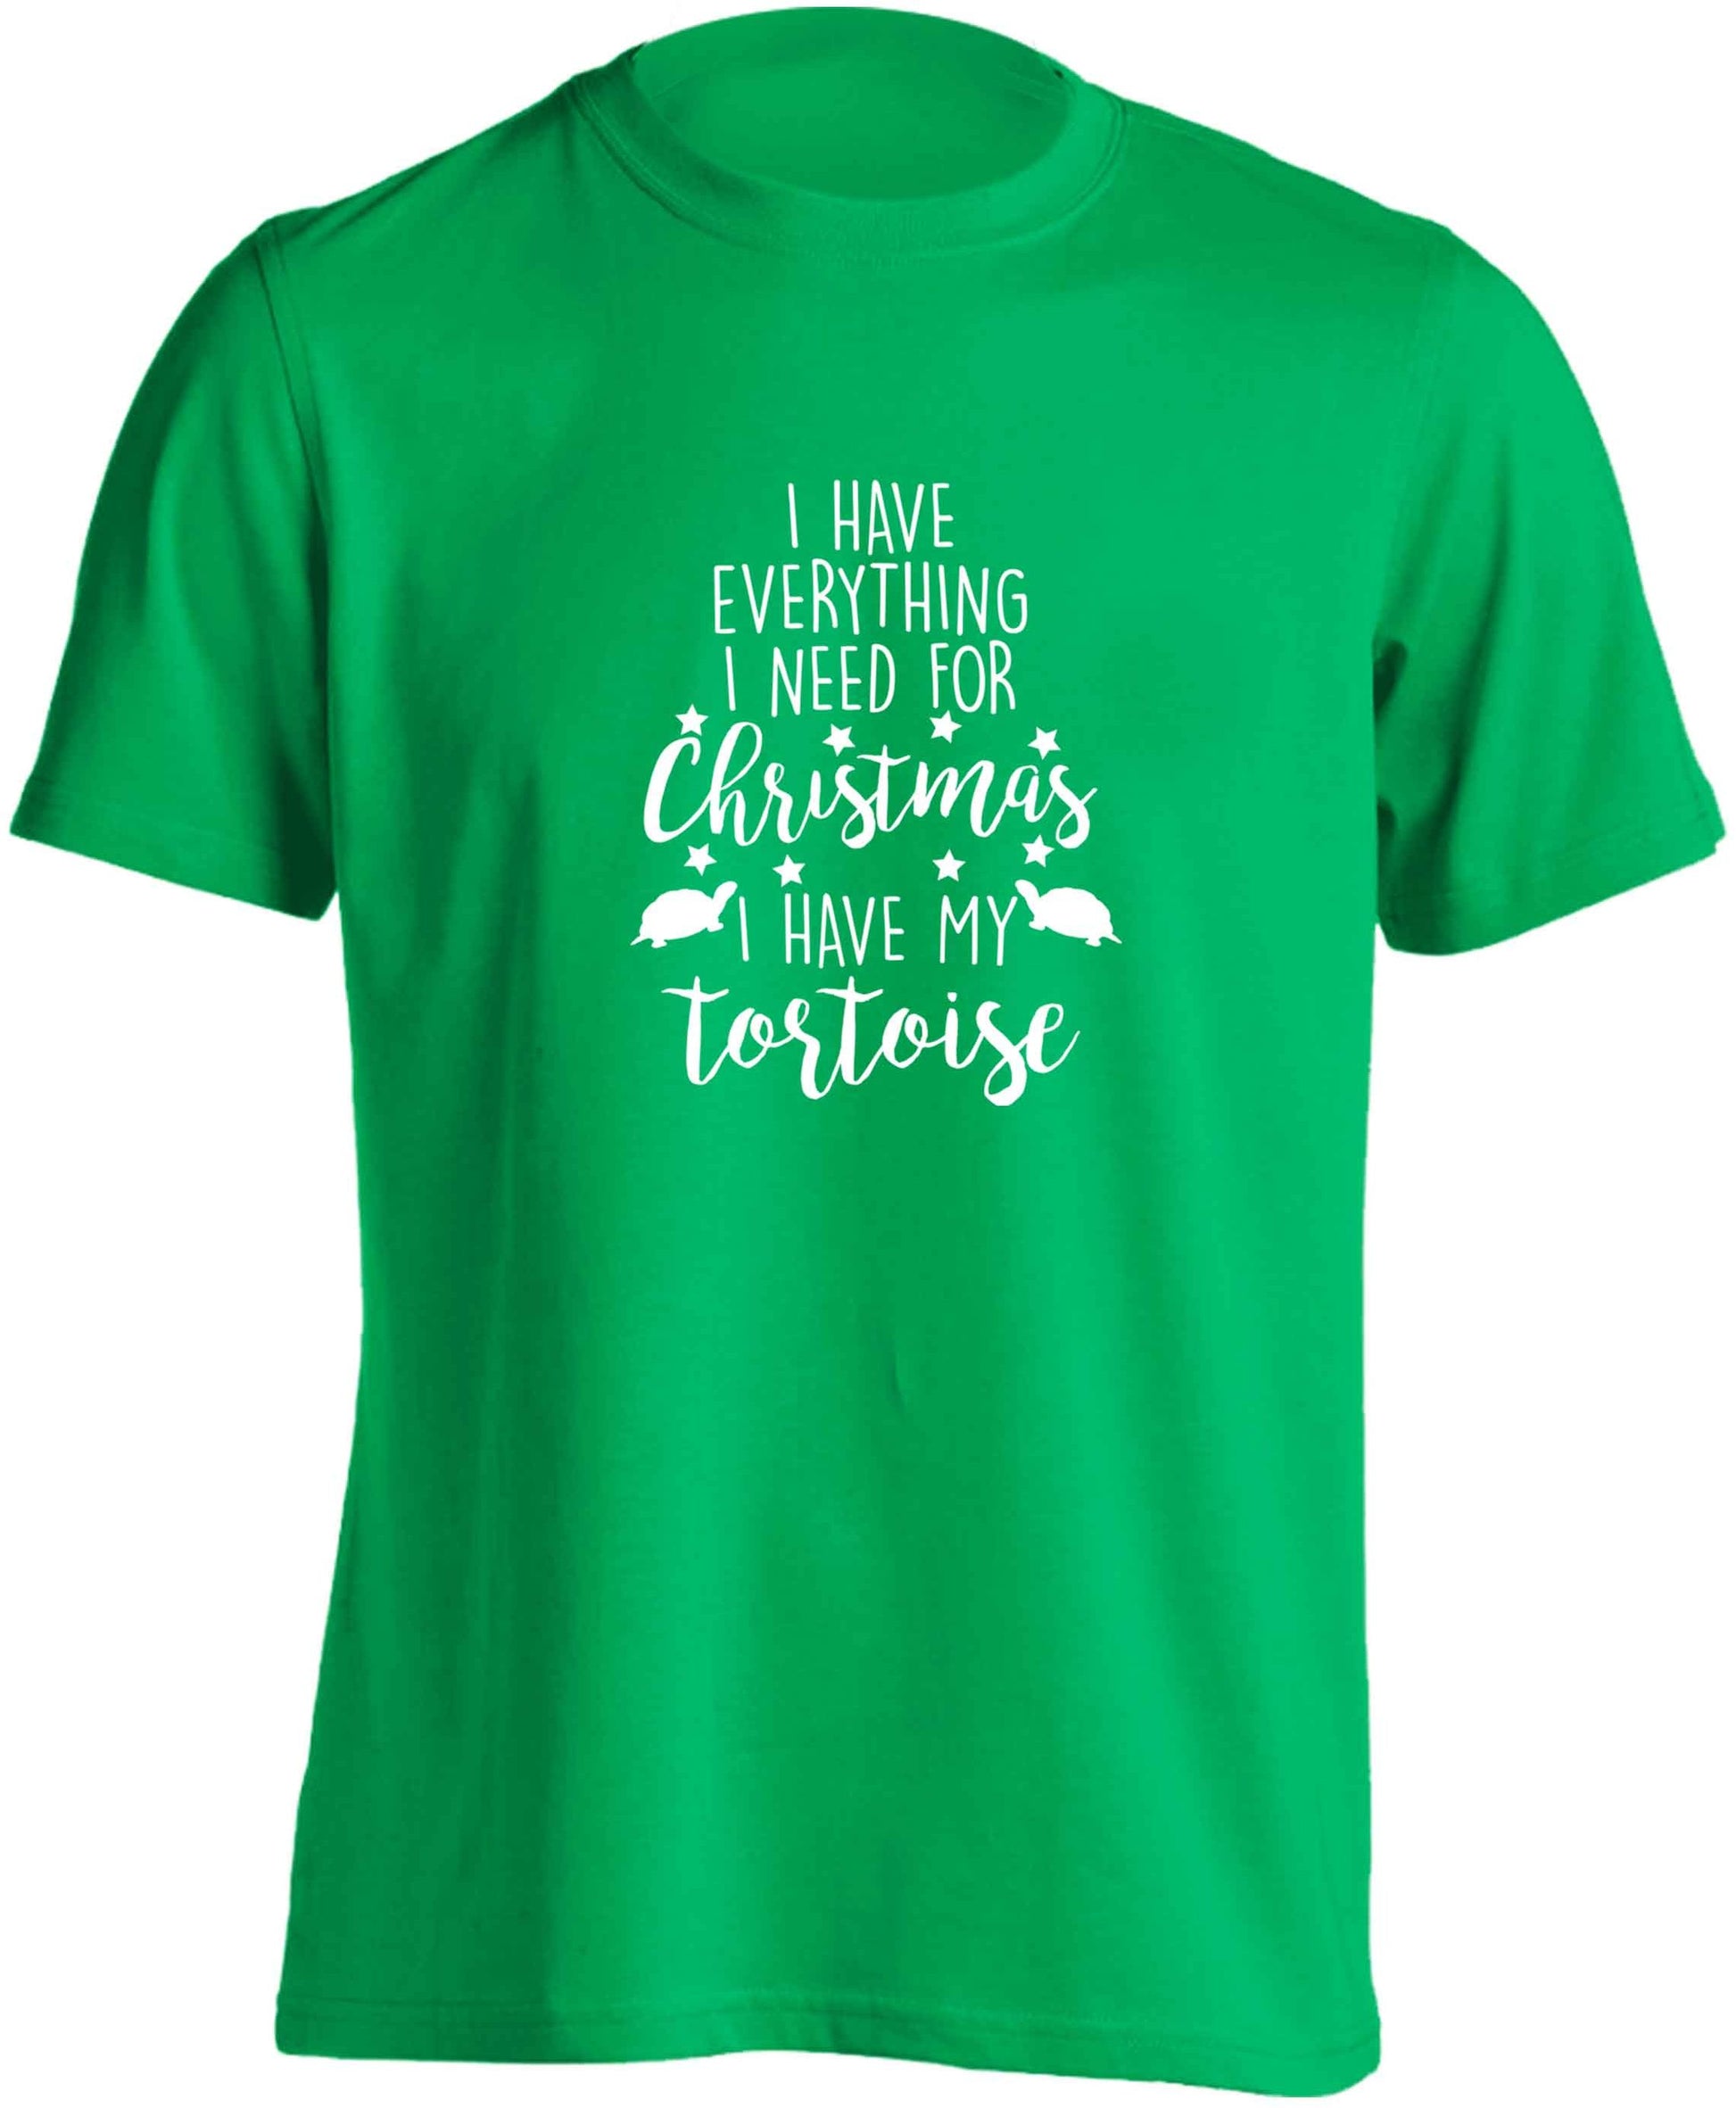 I have everything I need for Christmas I have my tortoise adults unisex green Tshirt 2XL